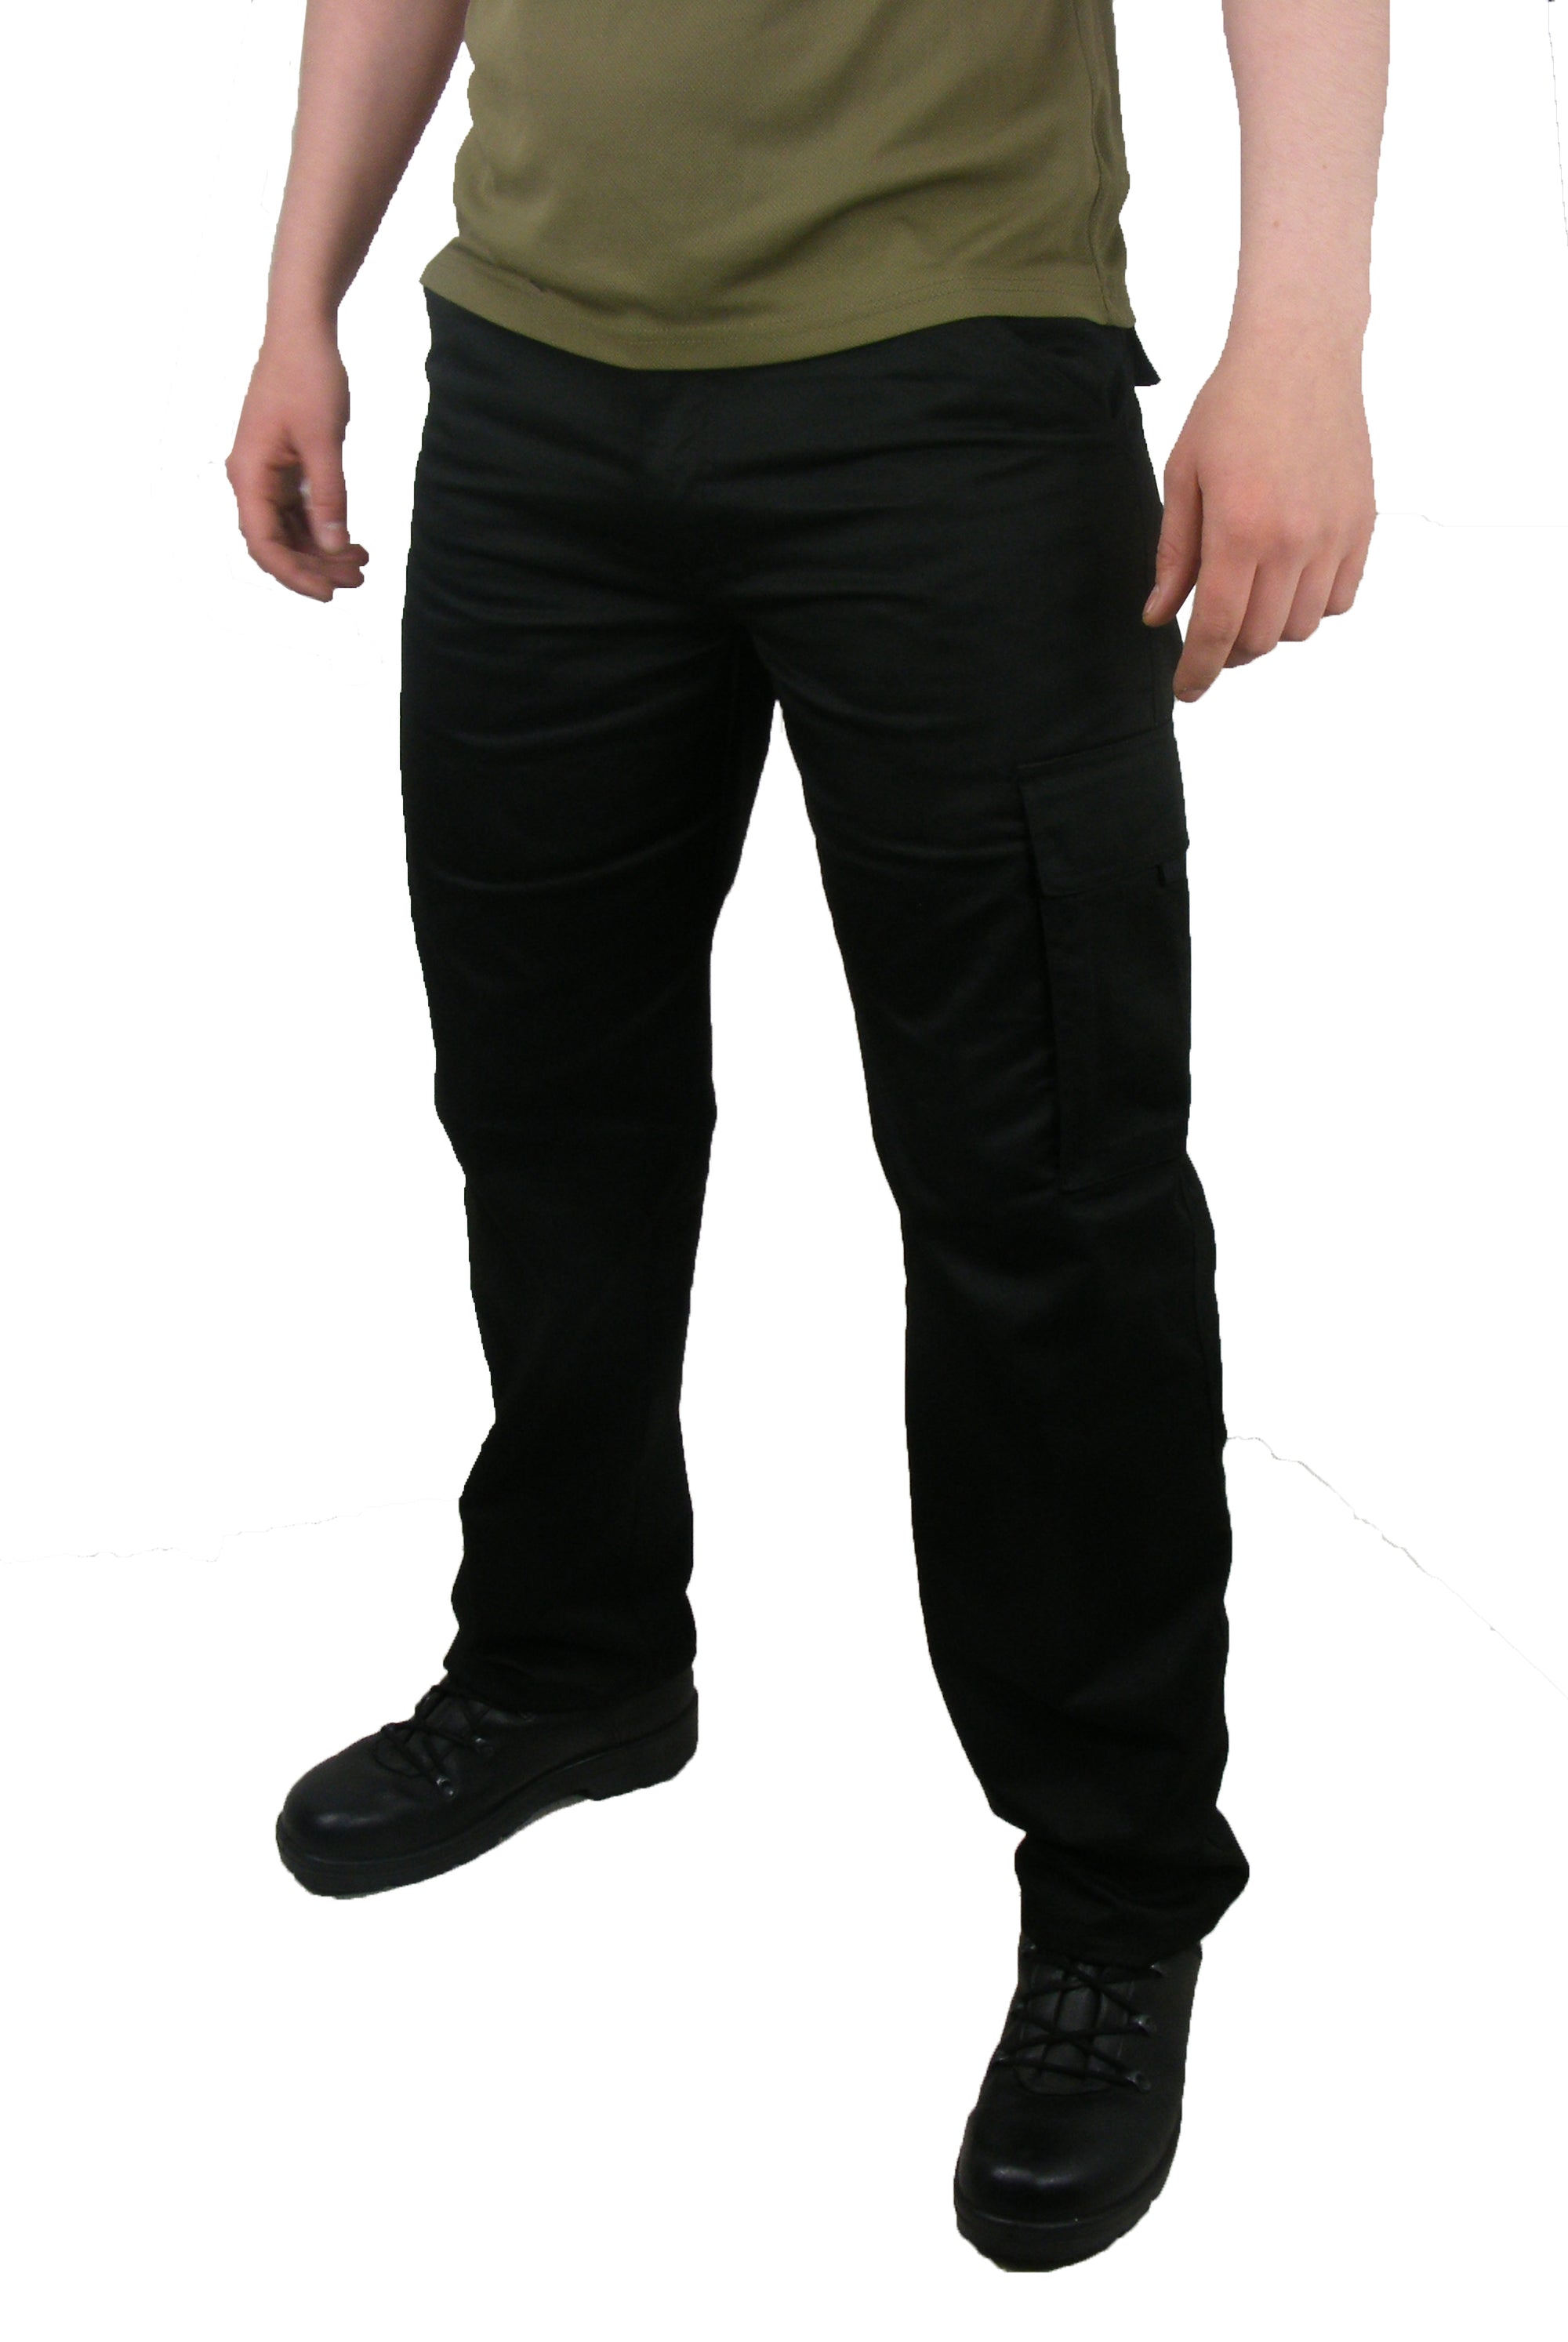 Dutch Military Police - Black Five-Pocket Security Trousers - Unissued